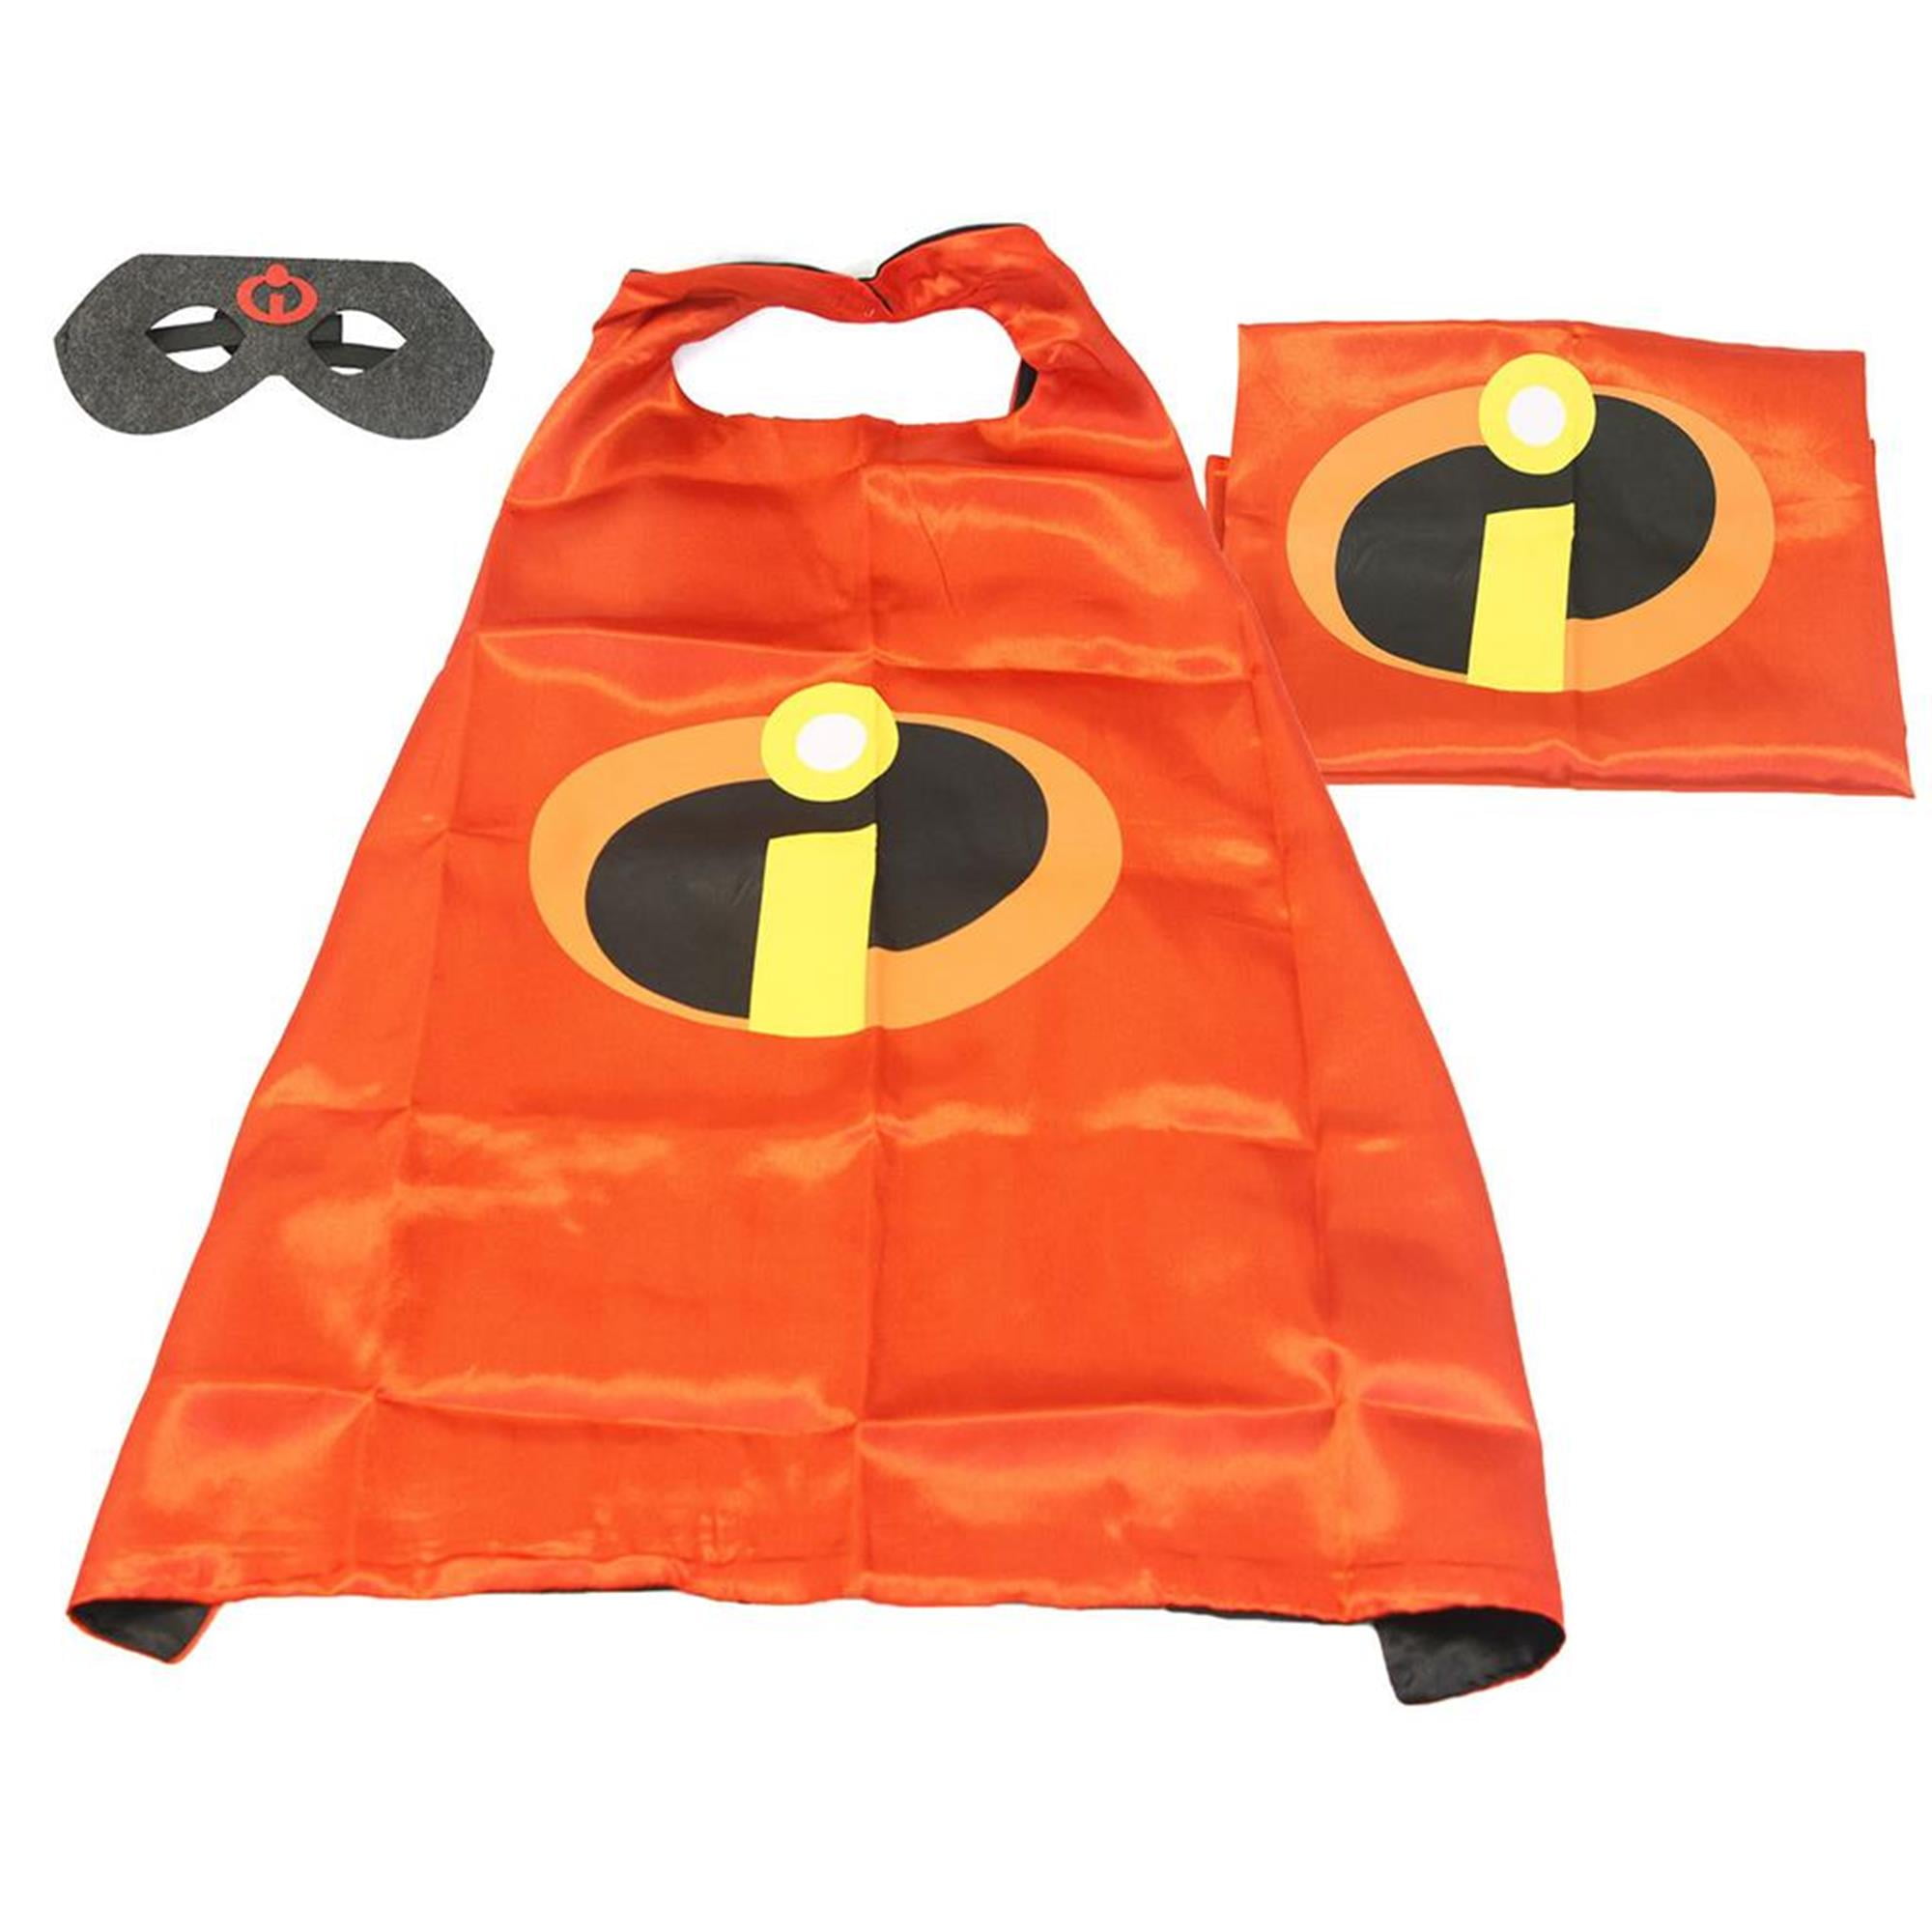 6 Set Superhero Capes with Masks for Kids Dress Up Costumes Cartoon Cosplay